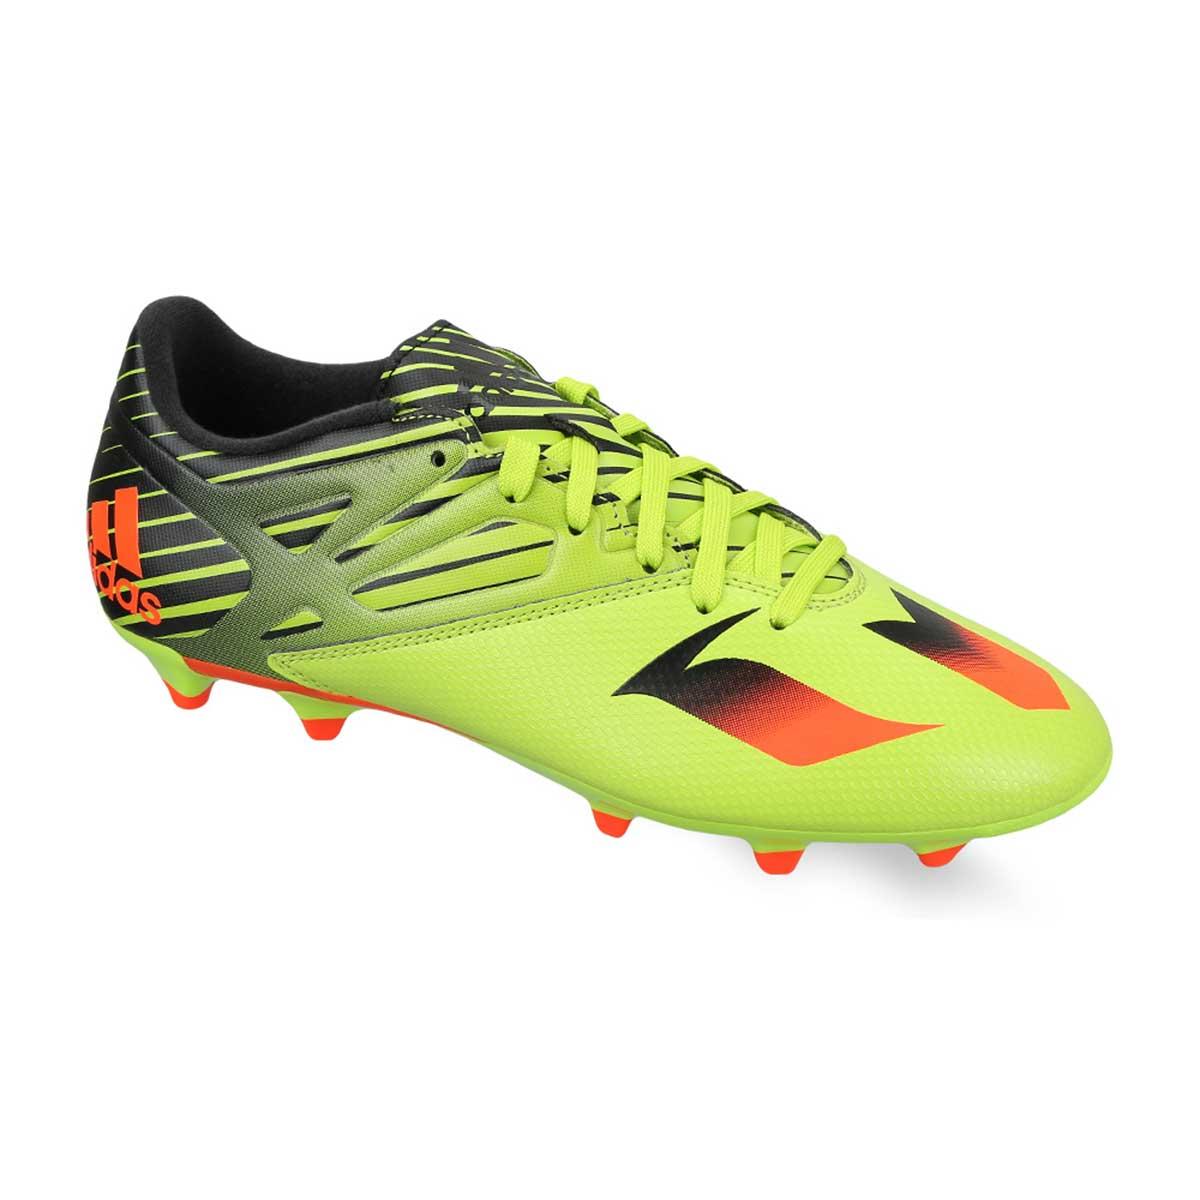 Buy Adidas Messi Football Shoes (Green/Red/Black) Online